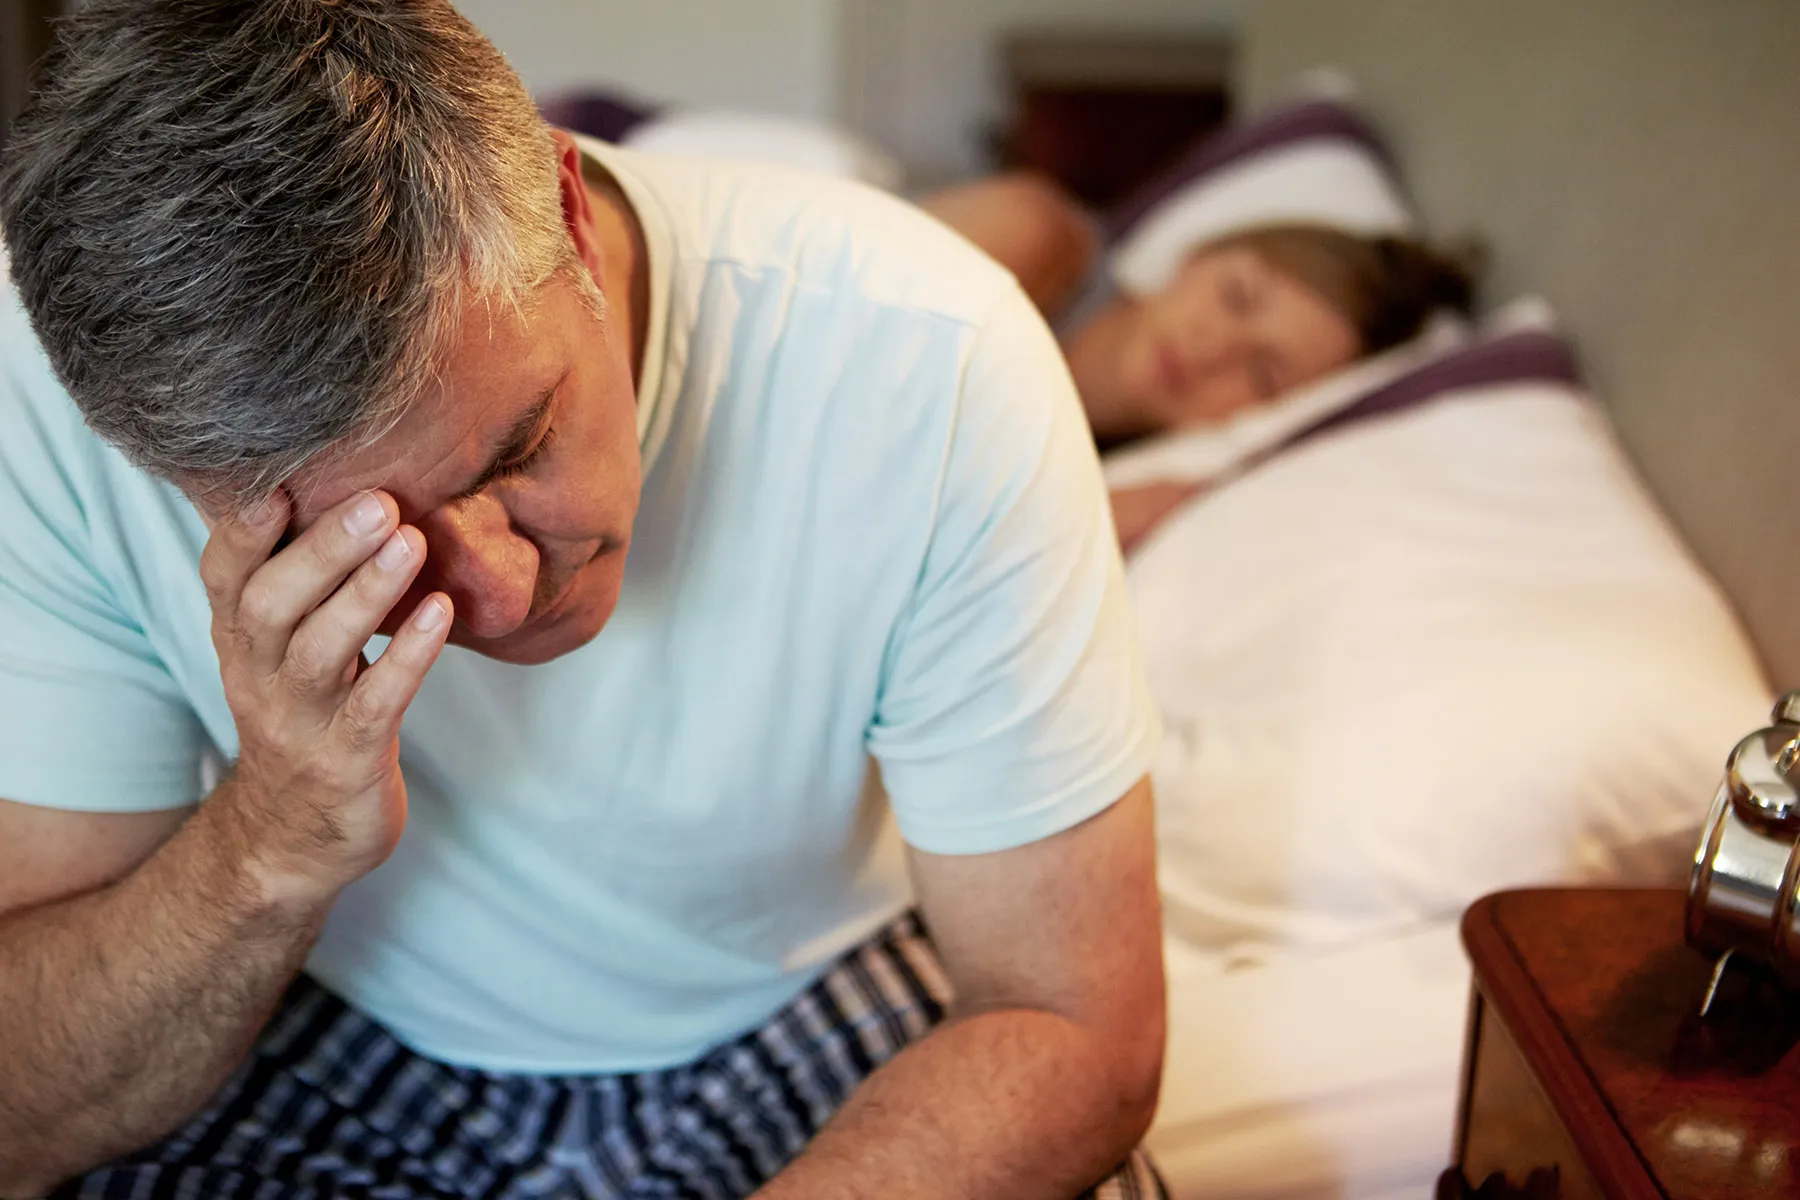 Nearly 3 in 10 Americans Have Insomnia: Survey